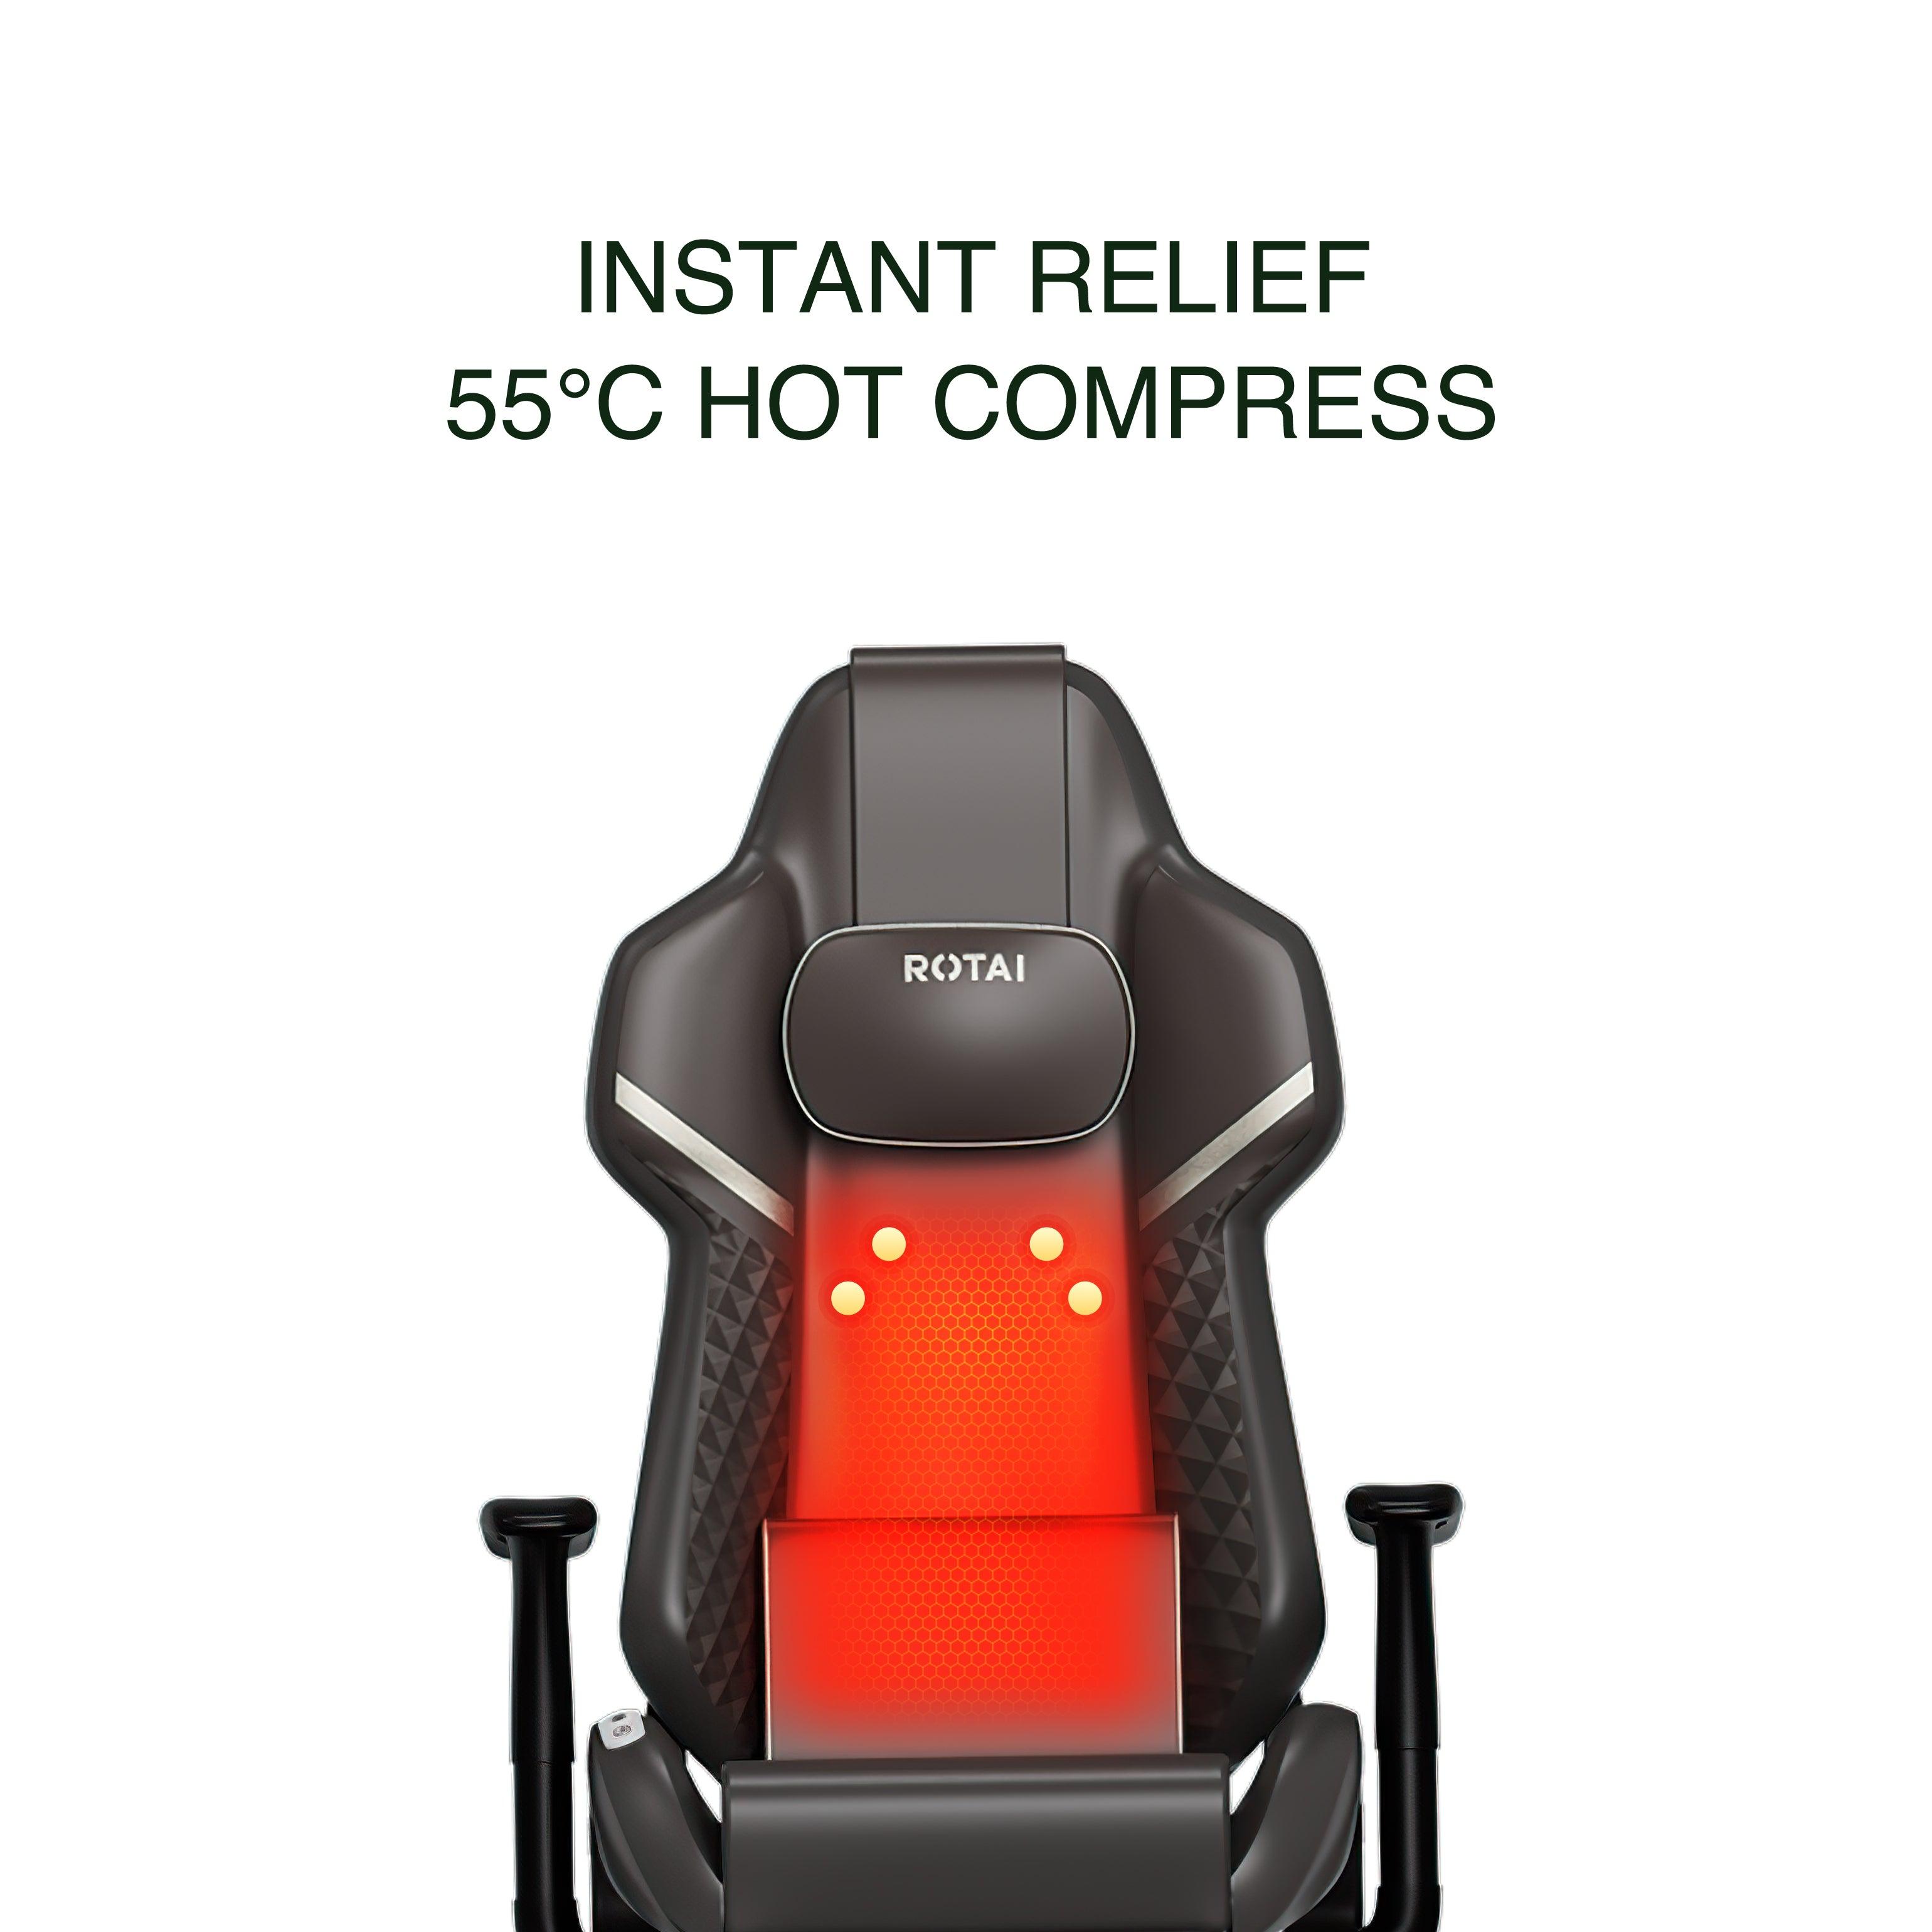 Office massage chair with 55°C hot compress for instant relief, perfect for a massage chair shop in Dubai, best massage chair UAE.